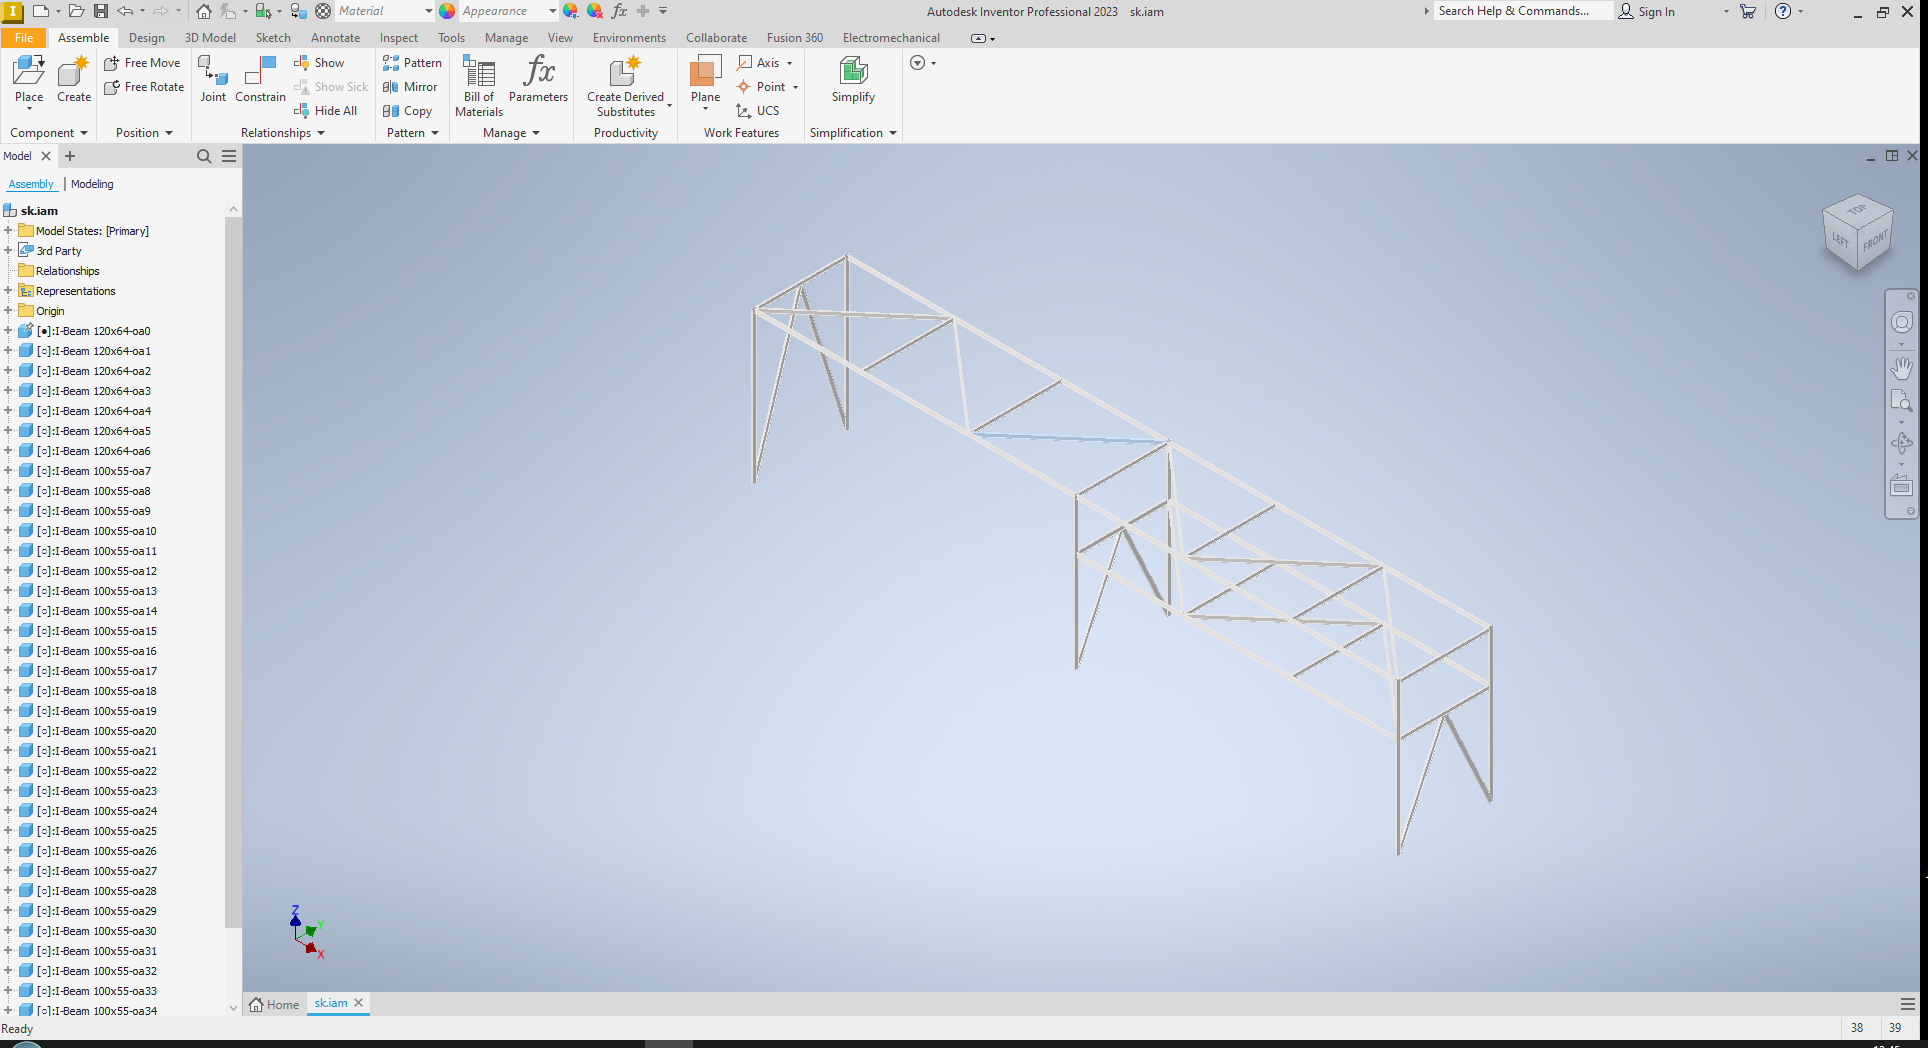 Structural Steel Model created in Autodesk Inventor 2023